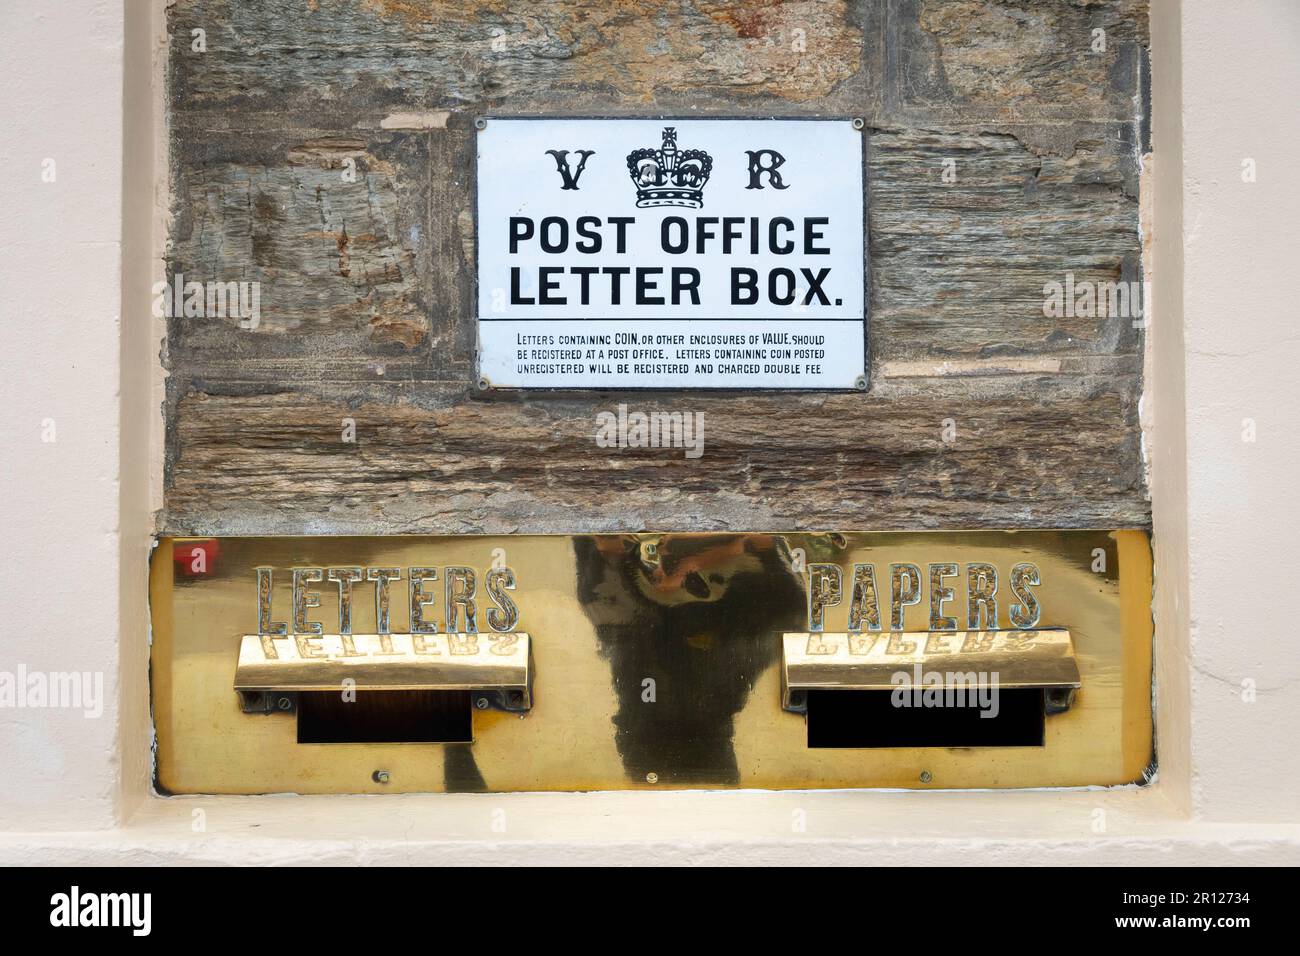 Victorian Post Office Letter Box, Ophir, Central Otago, South Island, New Zealand Stock Photo